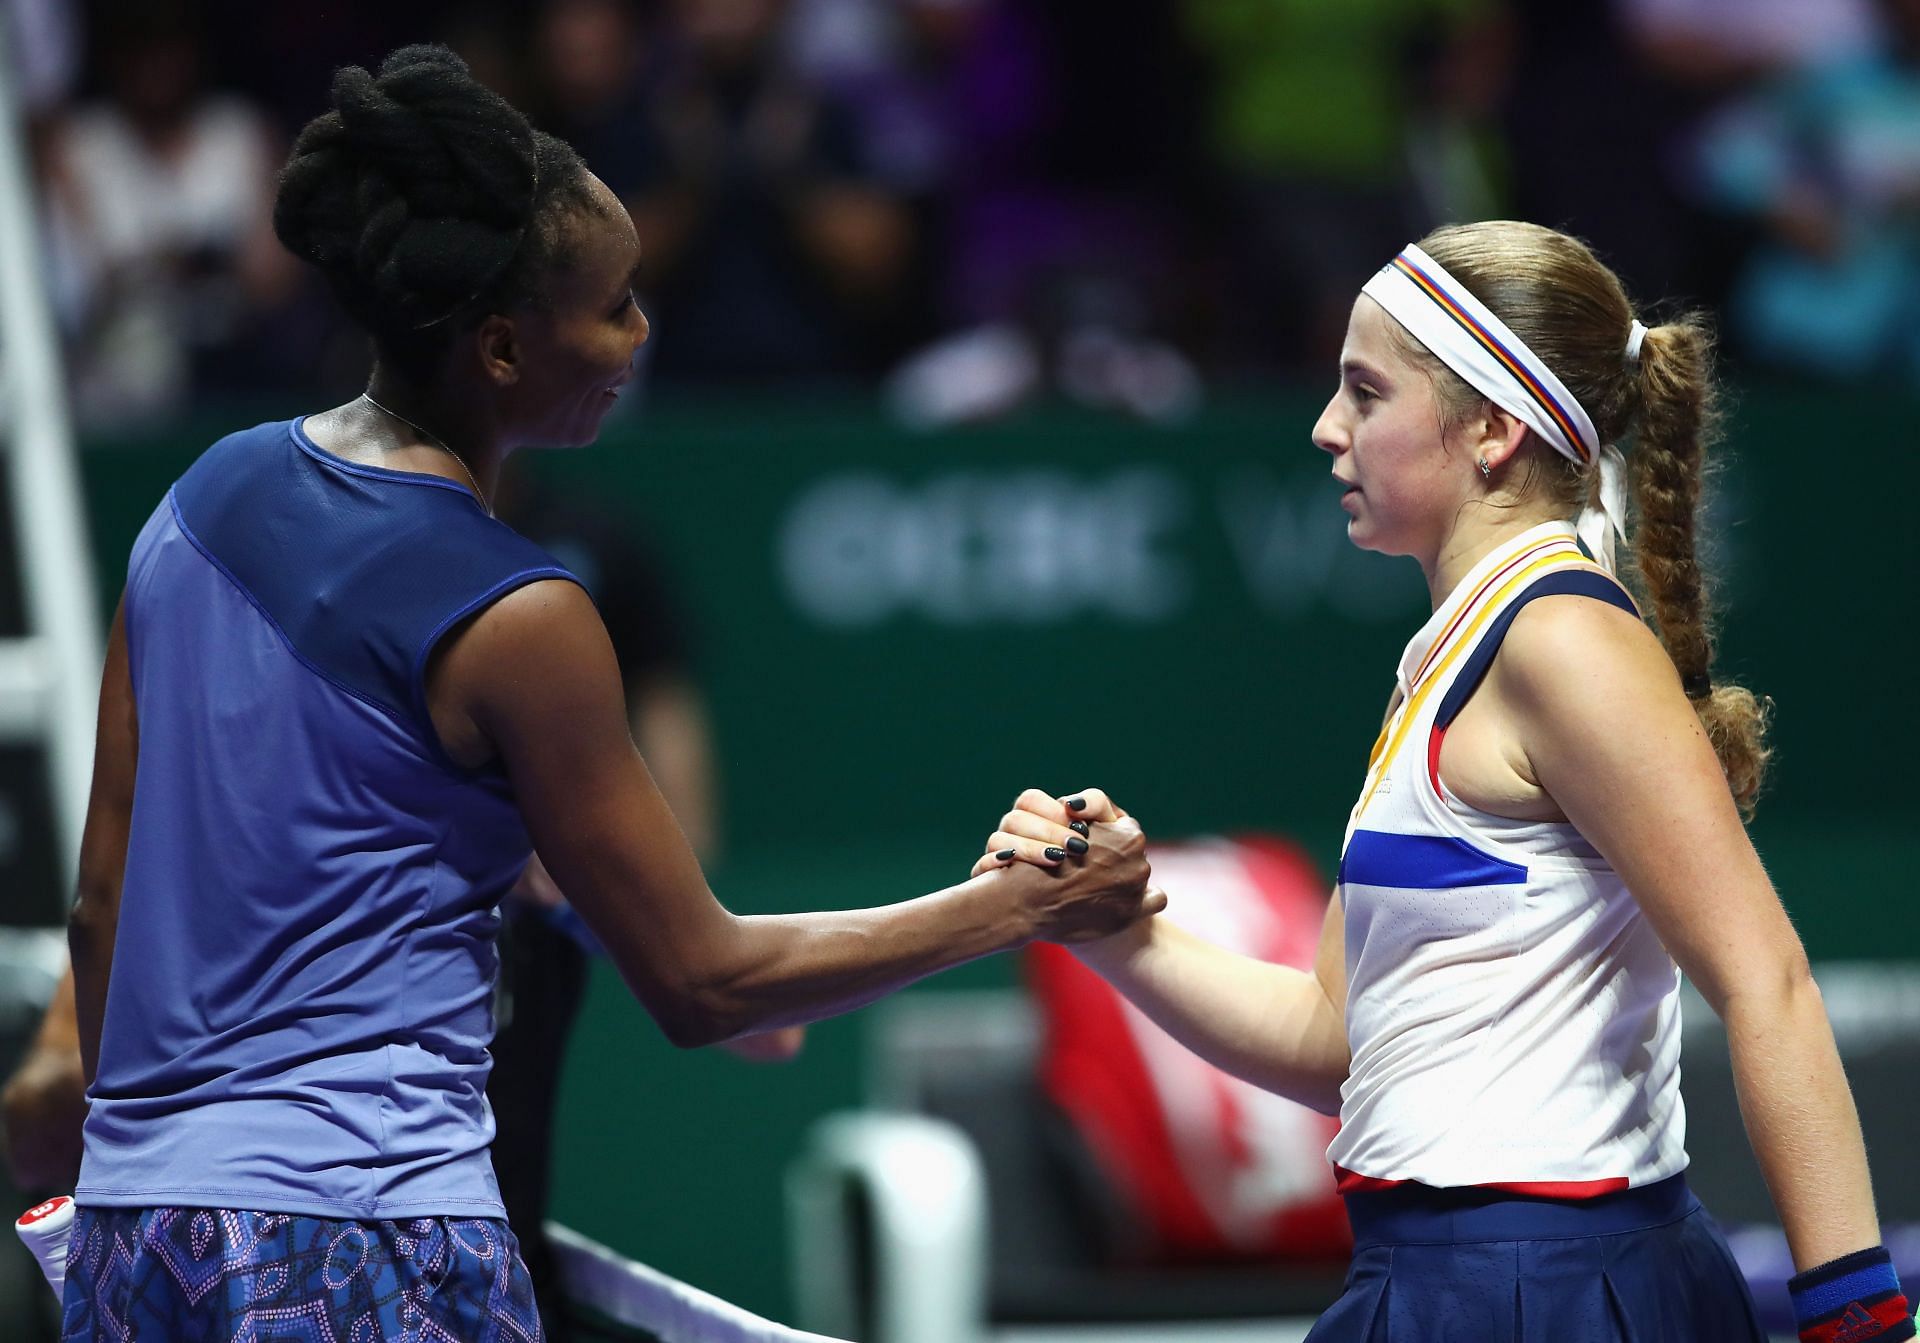 BNP Paribas WTA Finals Singapore presented by SC Global - Day 3